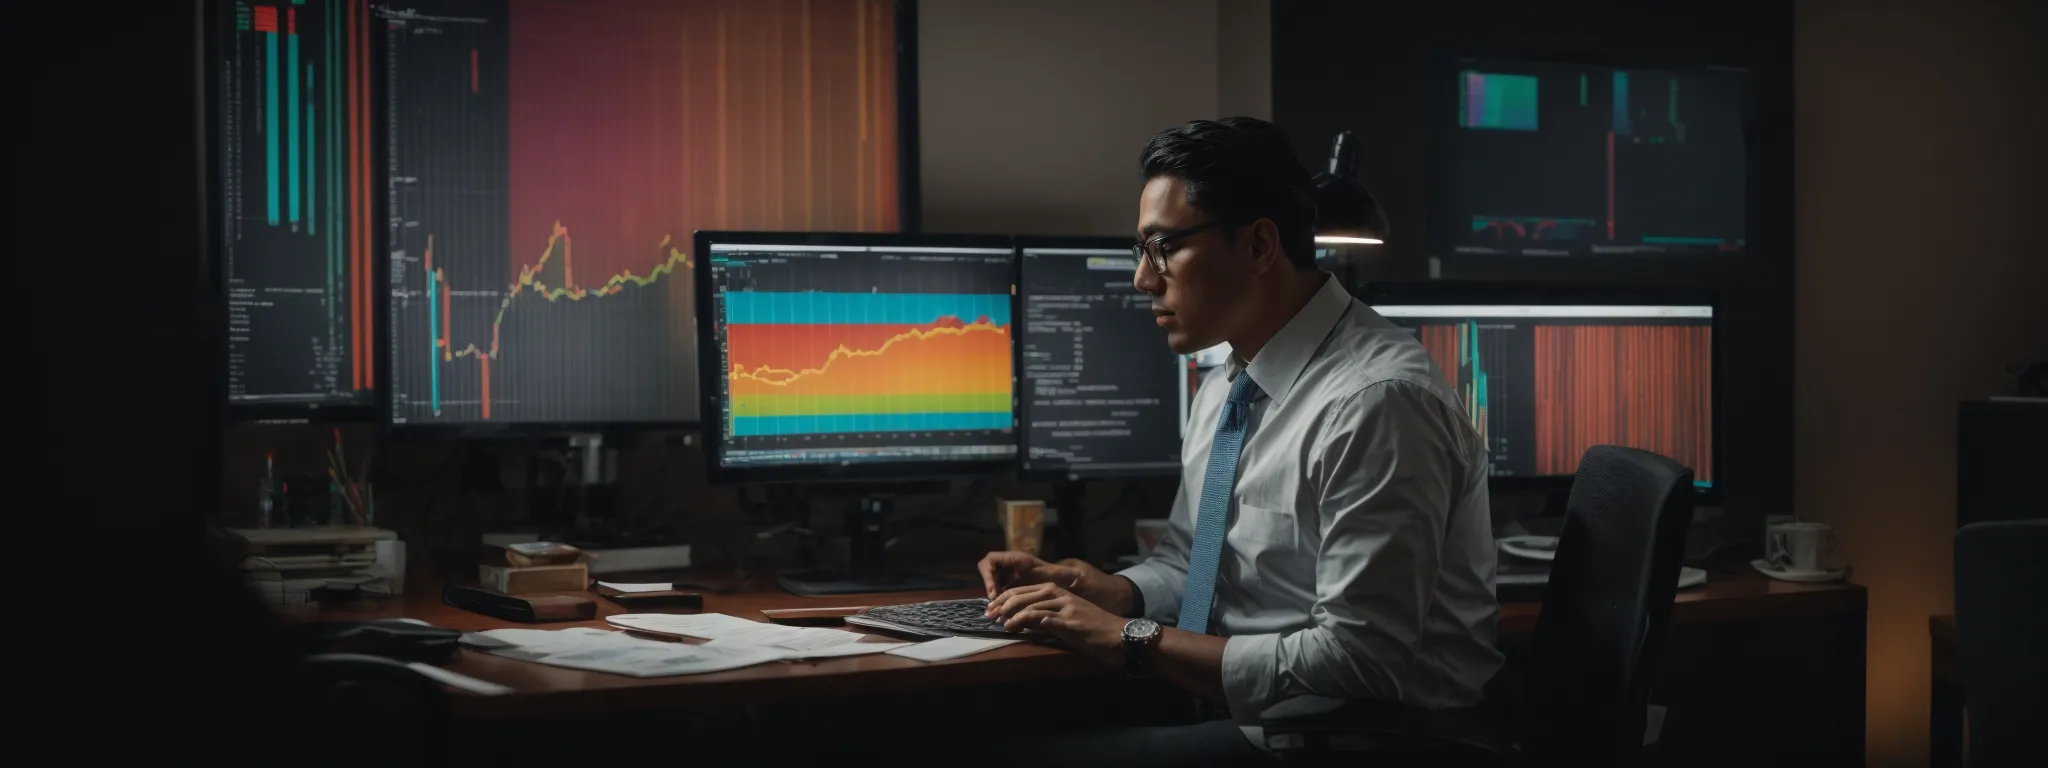 a marketer analyzing colorful graphs and data charts on a computer screen to fine-tune a ppc campaign.